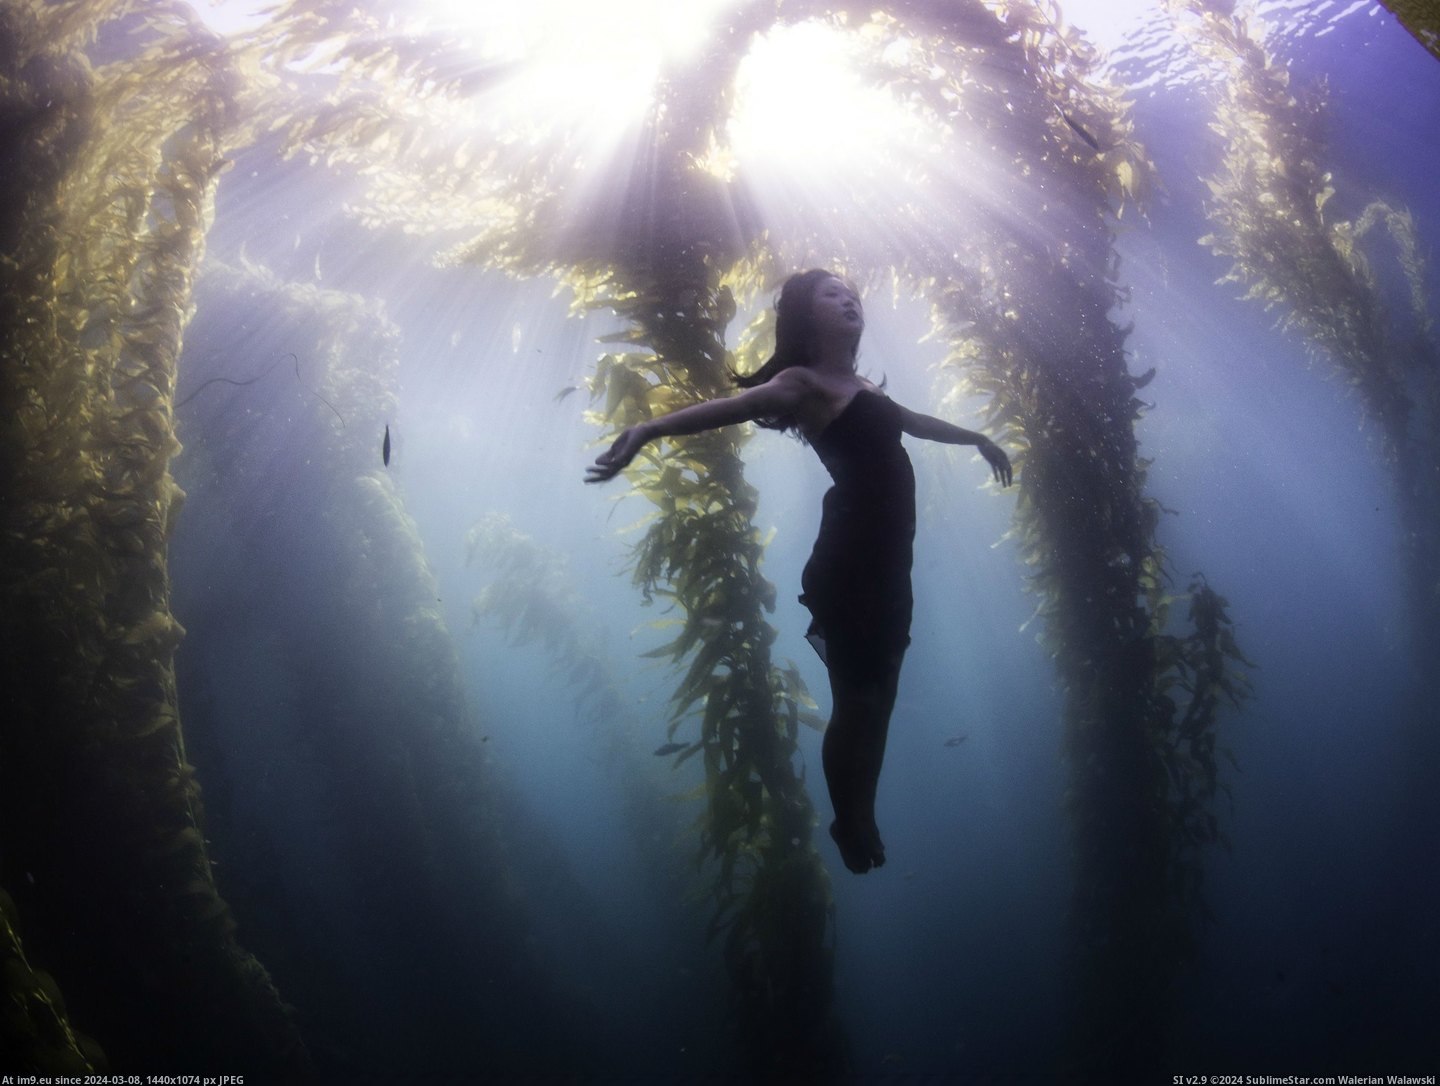 #You #Dress #Jump #Convinced #Kelp #Forest #Bought [Pics] Bought my gf a dress and convinced her to jump into the middle of a kelp forest. What do you think? Pic. (Image of album My r/PICS favs))